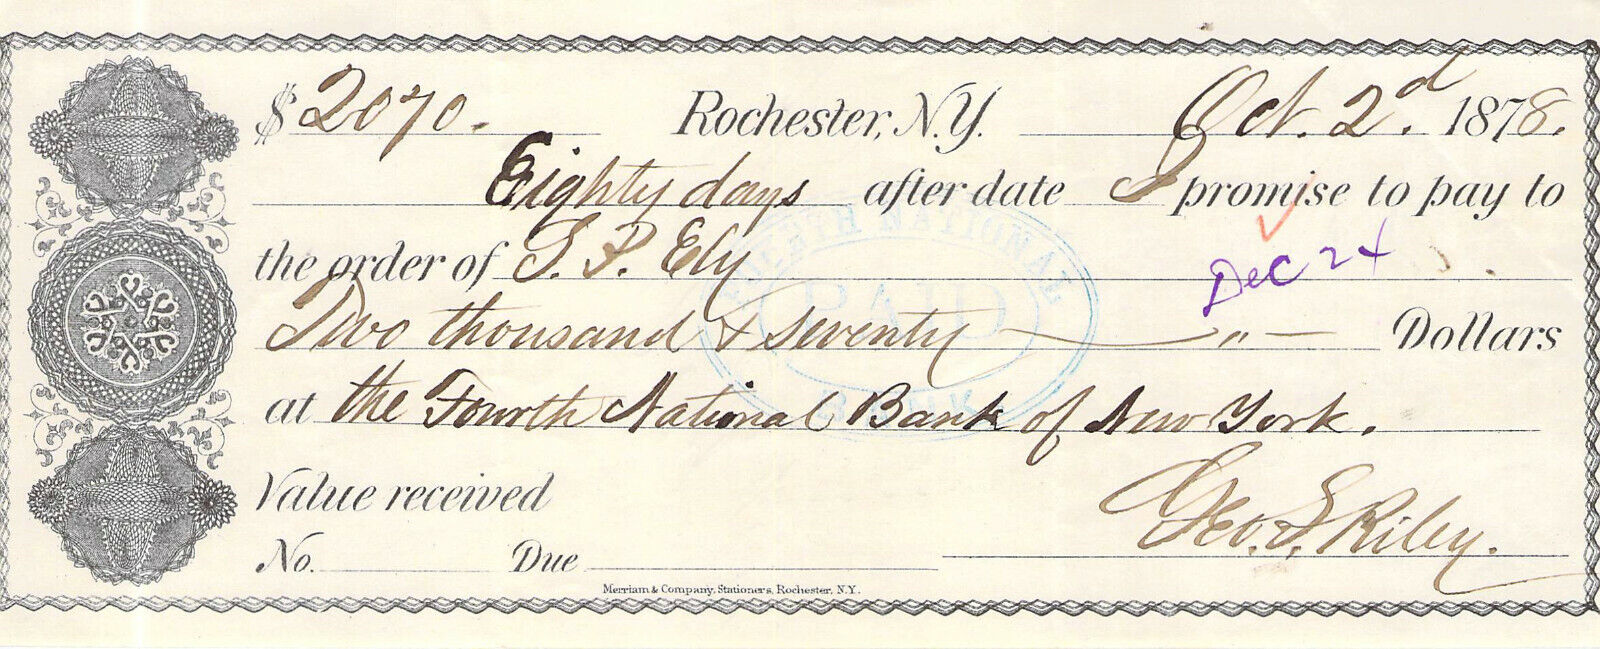 1878 S P ELY GEORGE RILEY ROCHESTER NEW YORK